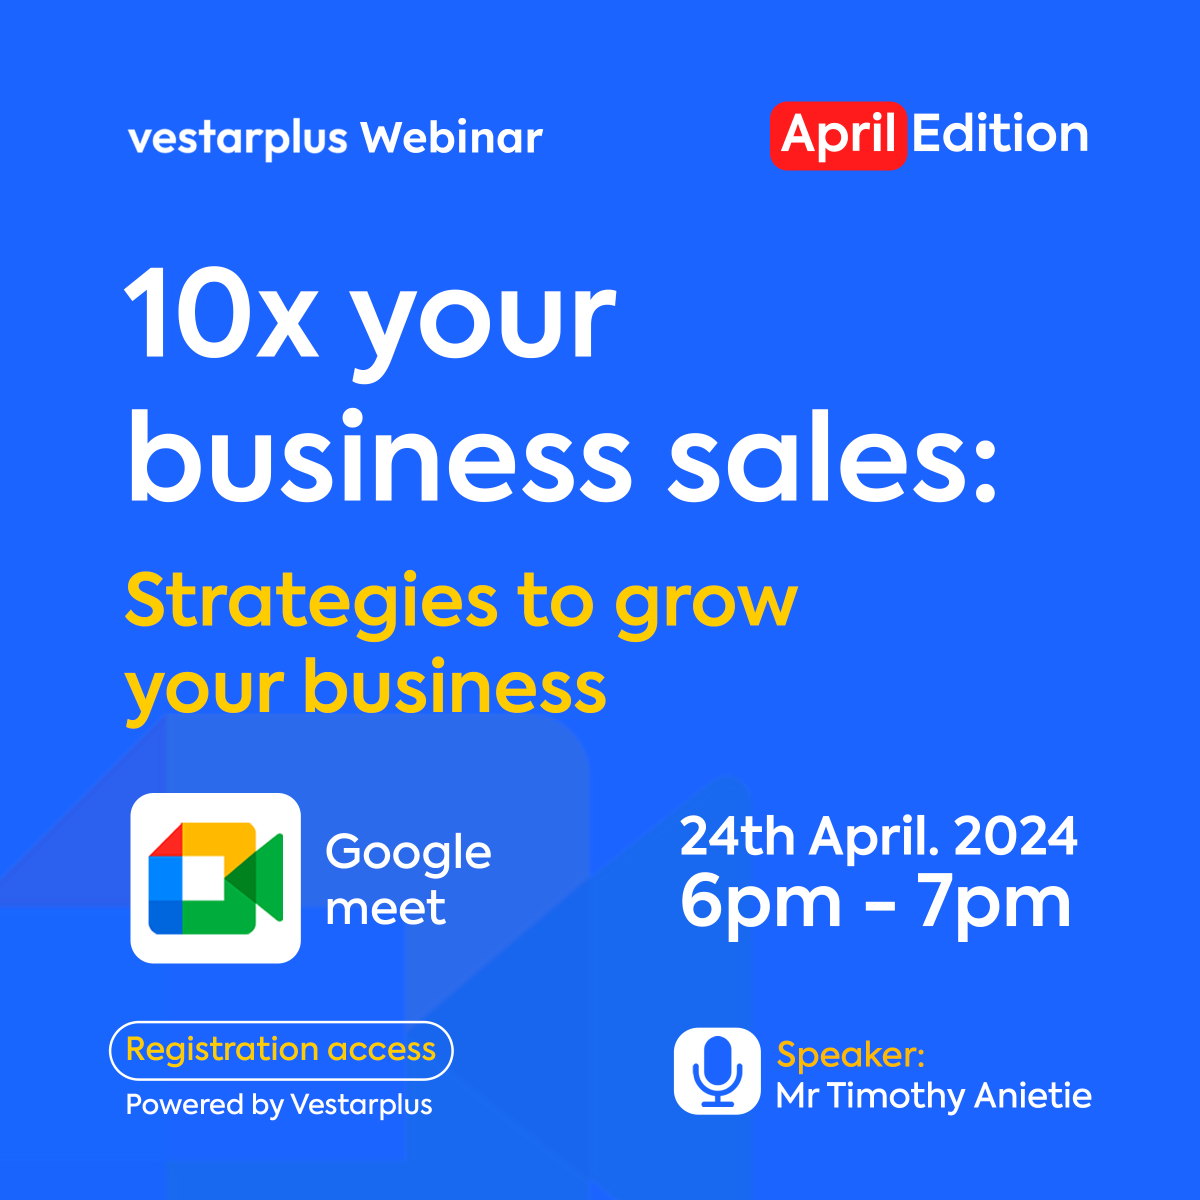 Come learn from our guest speaker, @timothy_anietie, at our educational webinar on 'ways on how to grow your business sales 10x' on April 24, 2024. There's a link in our bio. #webinar #webinargratis #businessowner #business #rebranding #rebranding